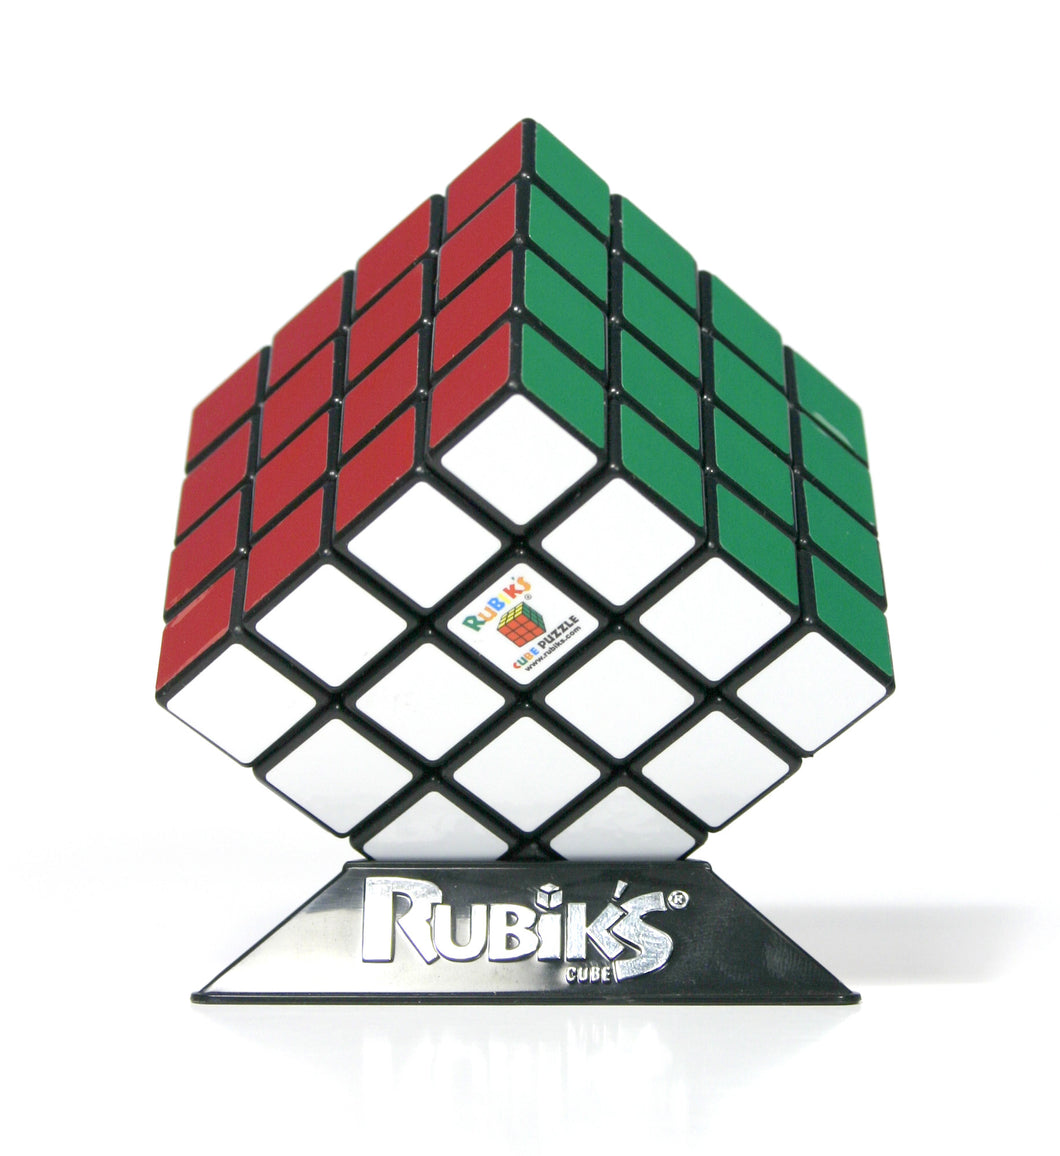 Rubiks Cube 4x4 - Are you up to the Challenge?